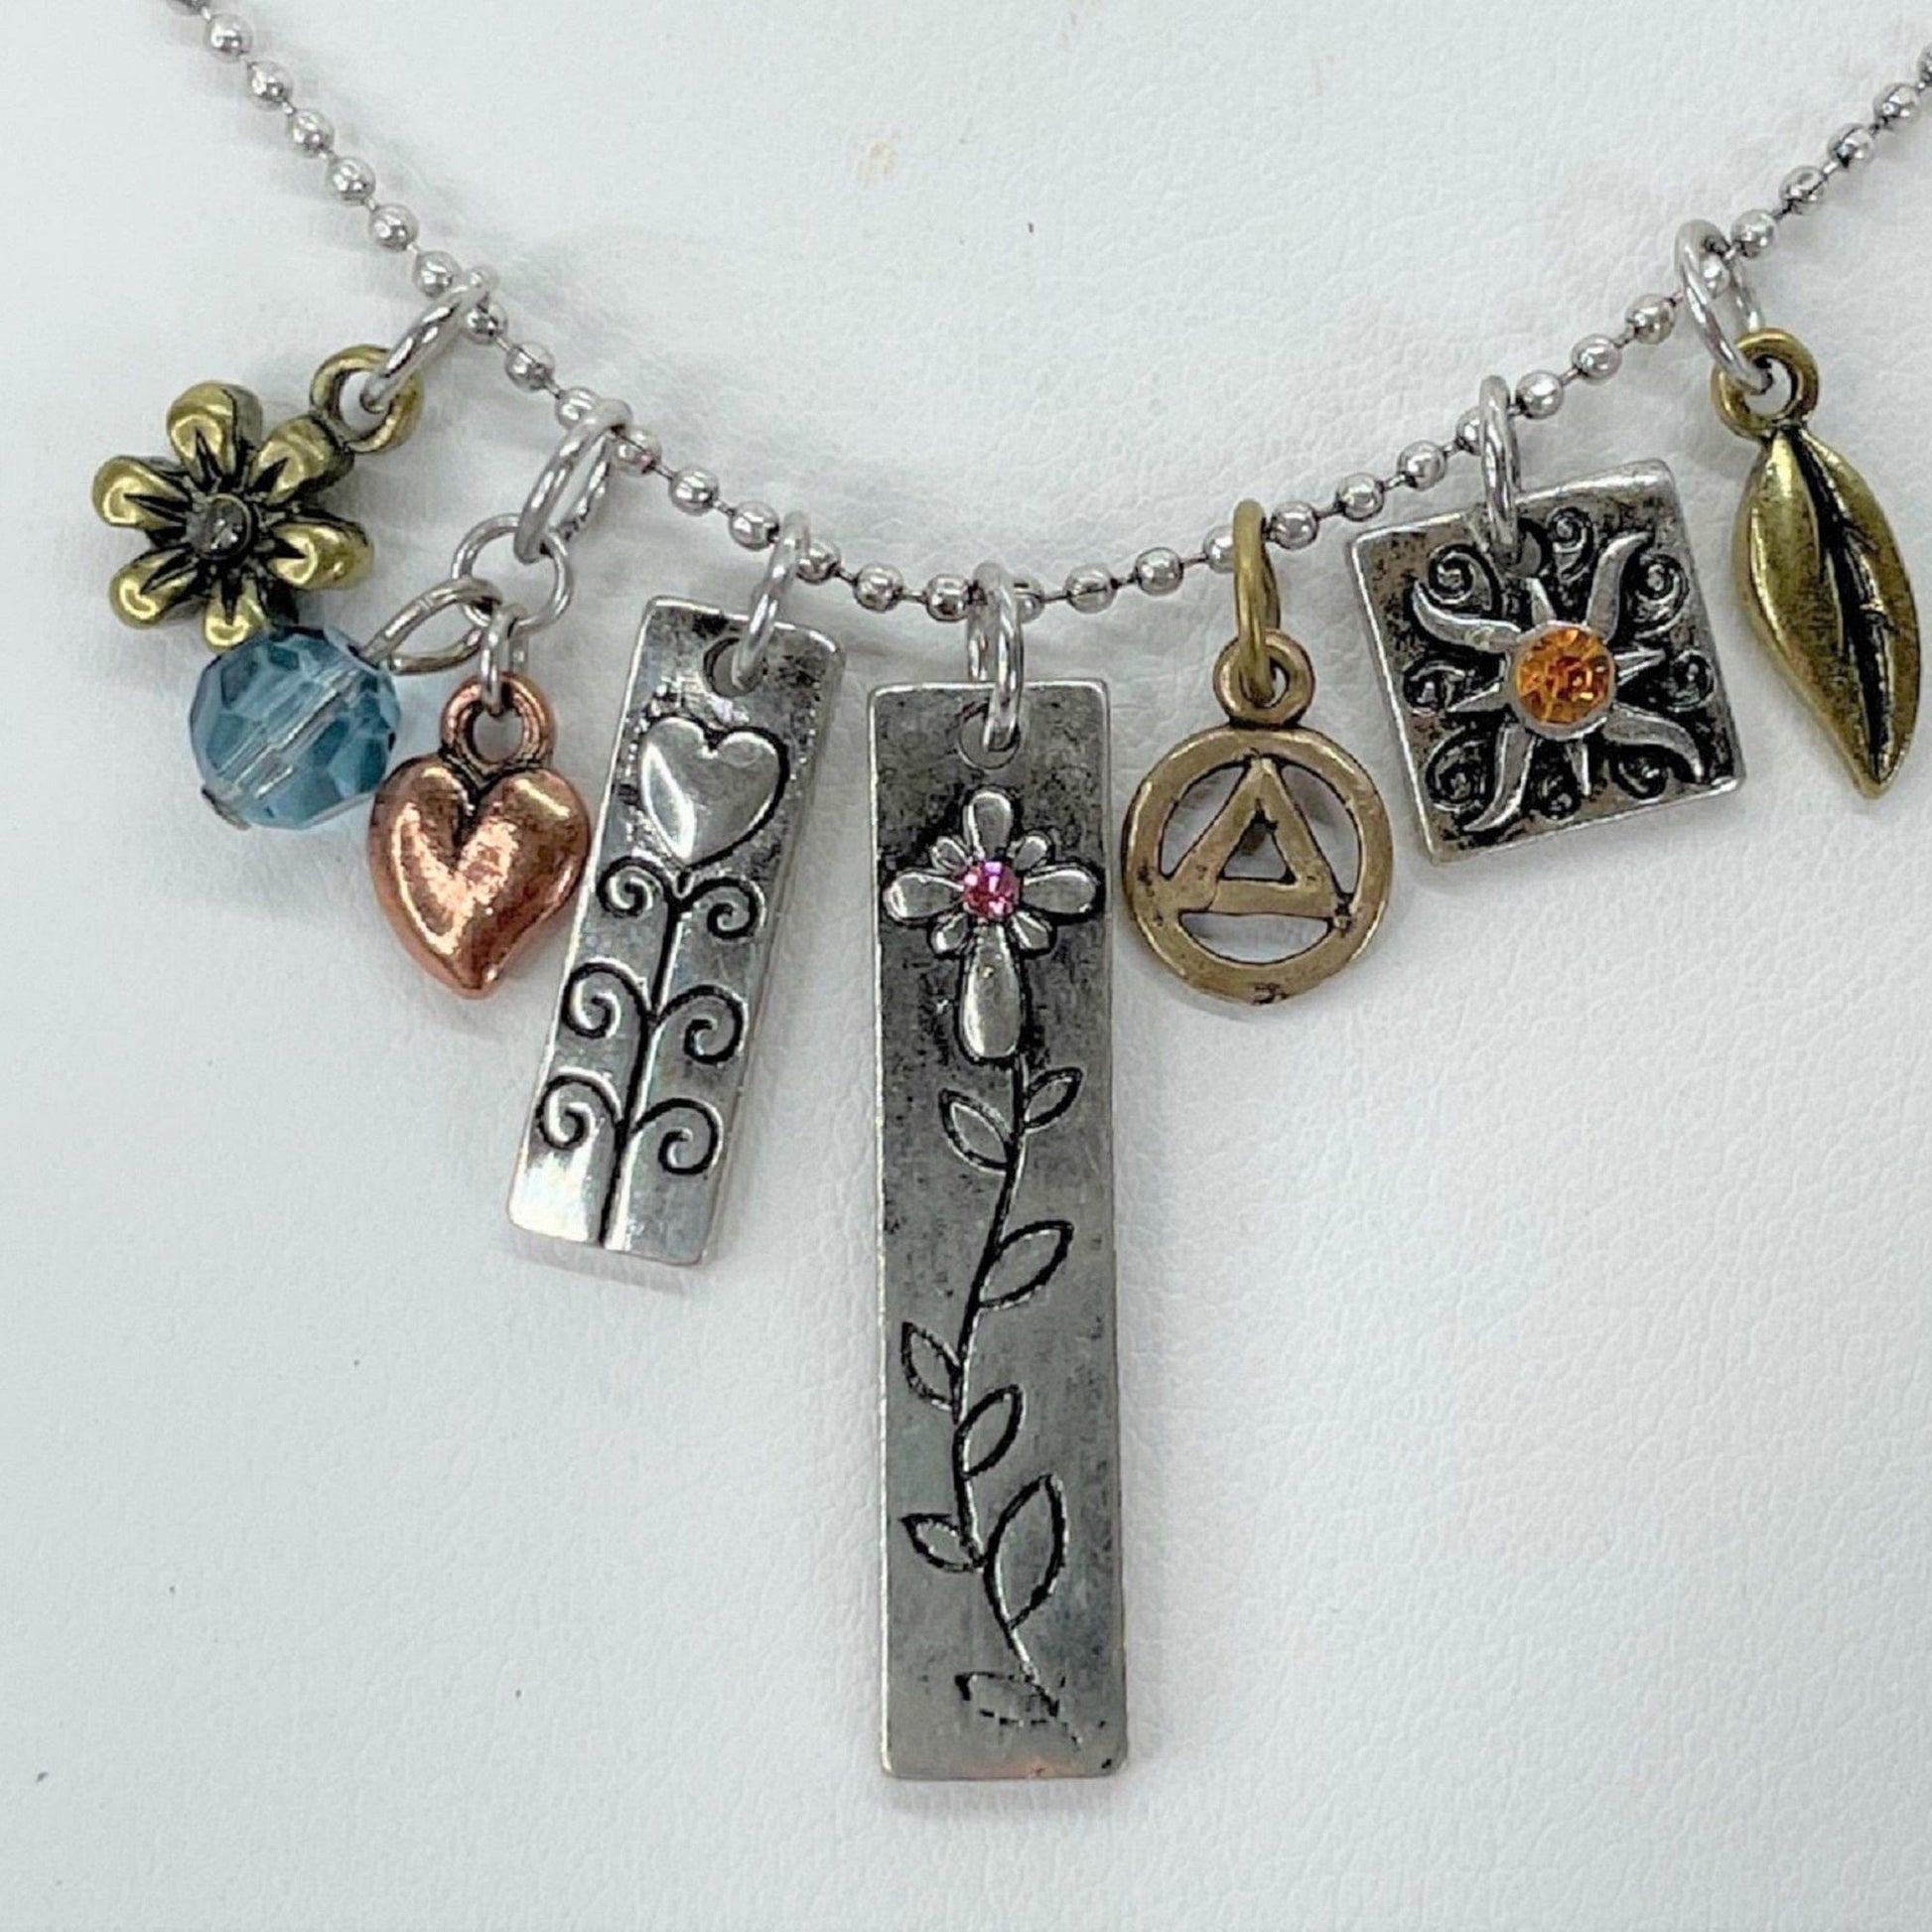 Trust-Faith-Believe Bar Necklace By Recovery Matters